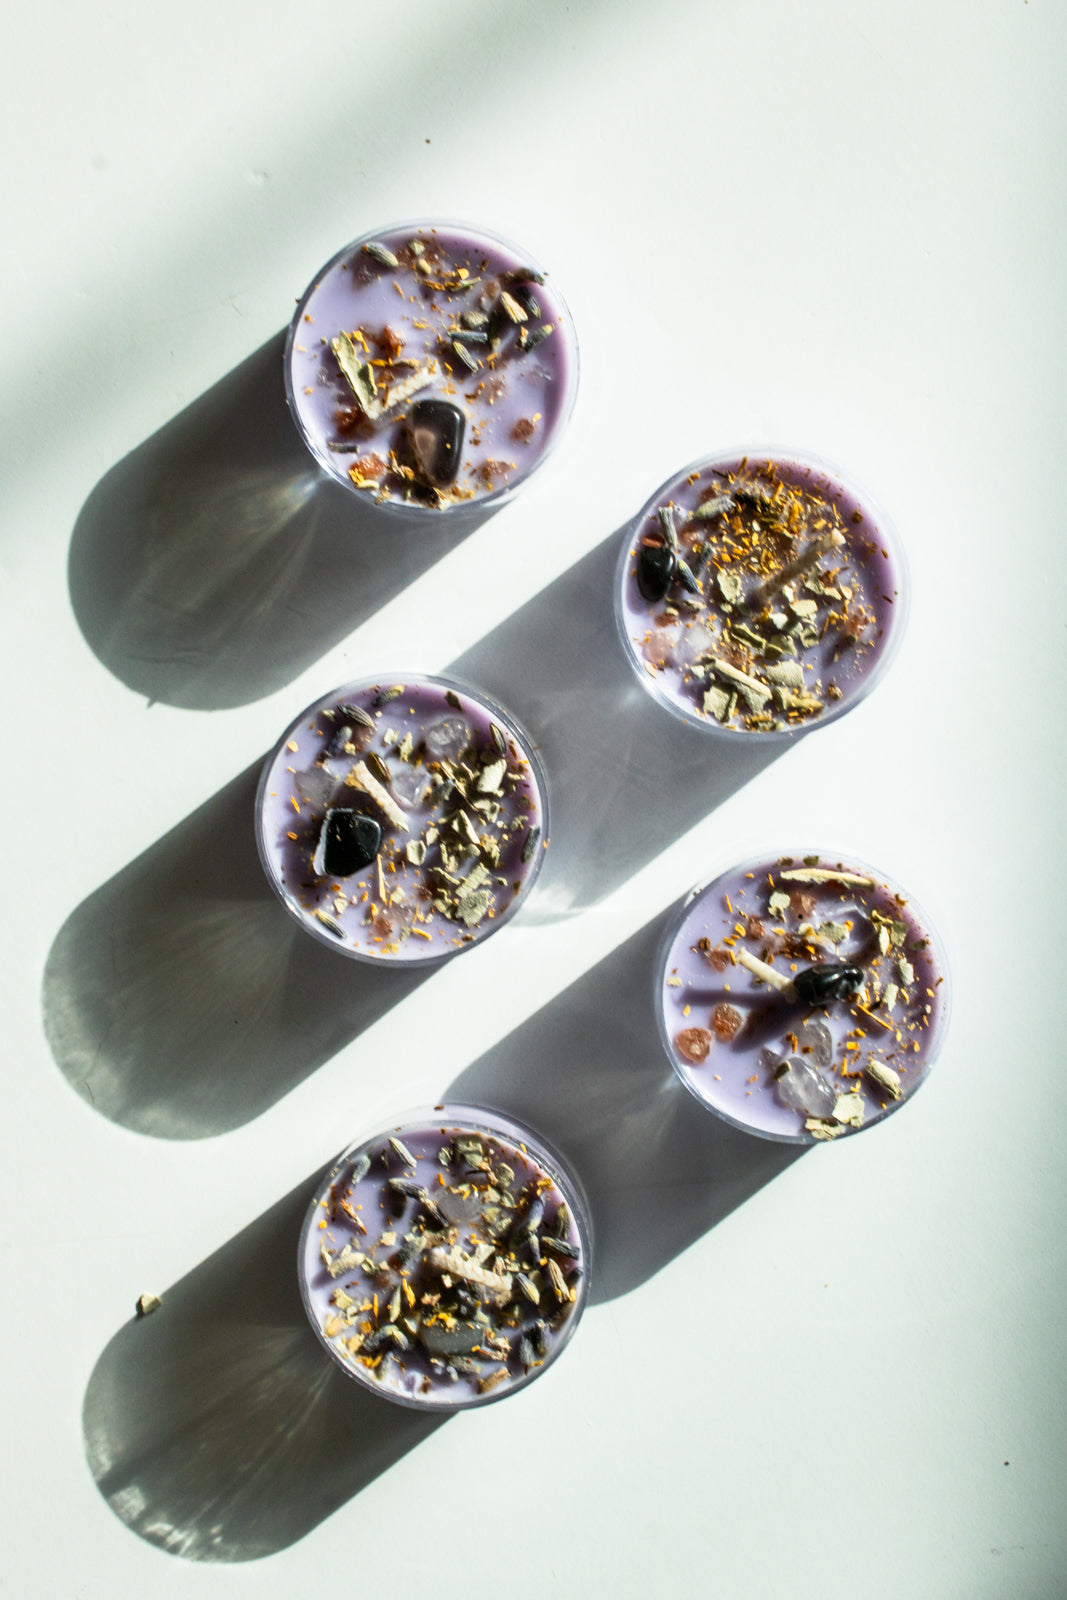 purple tea light candles topped with crystals and white sage for protection